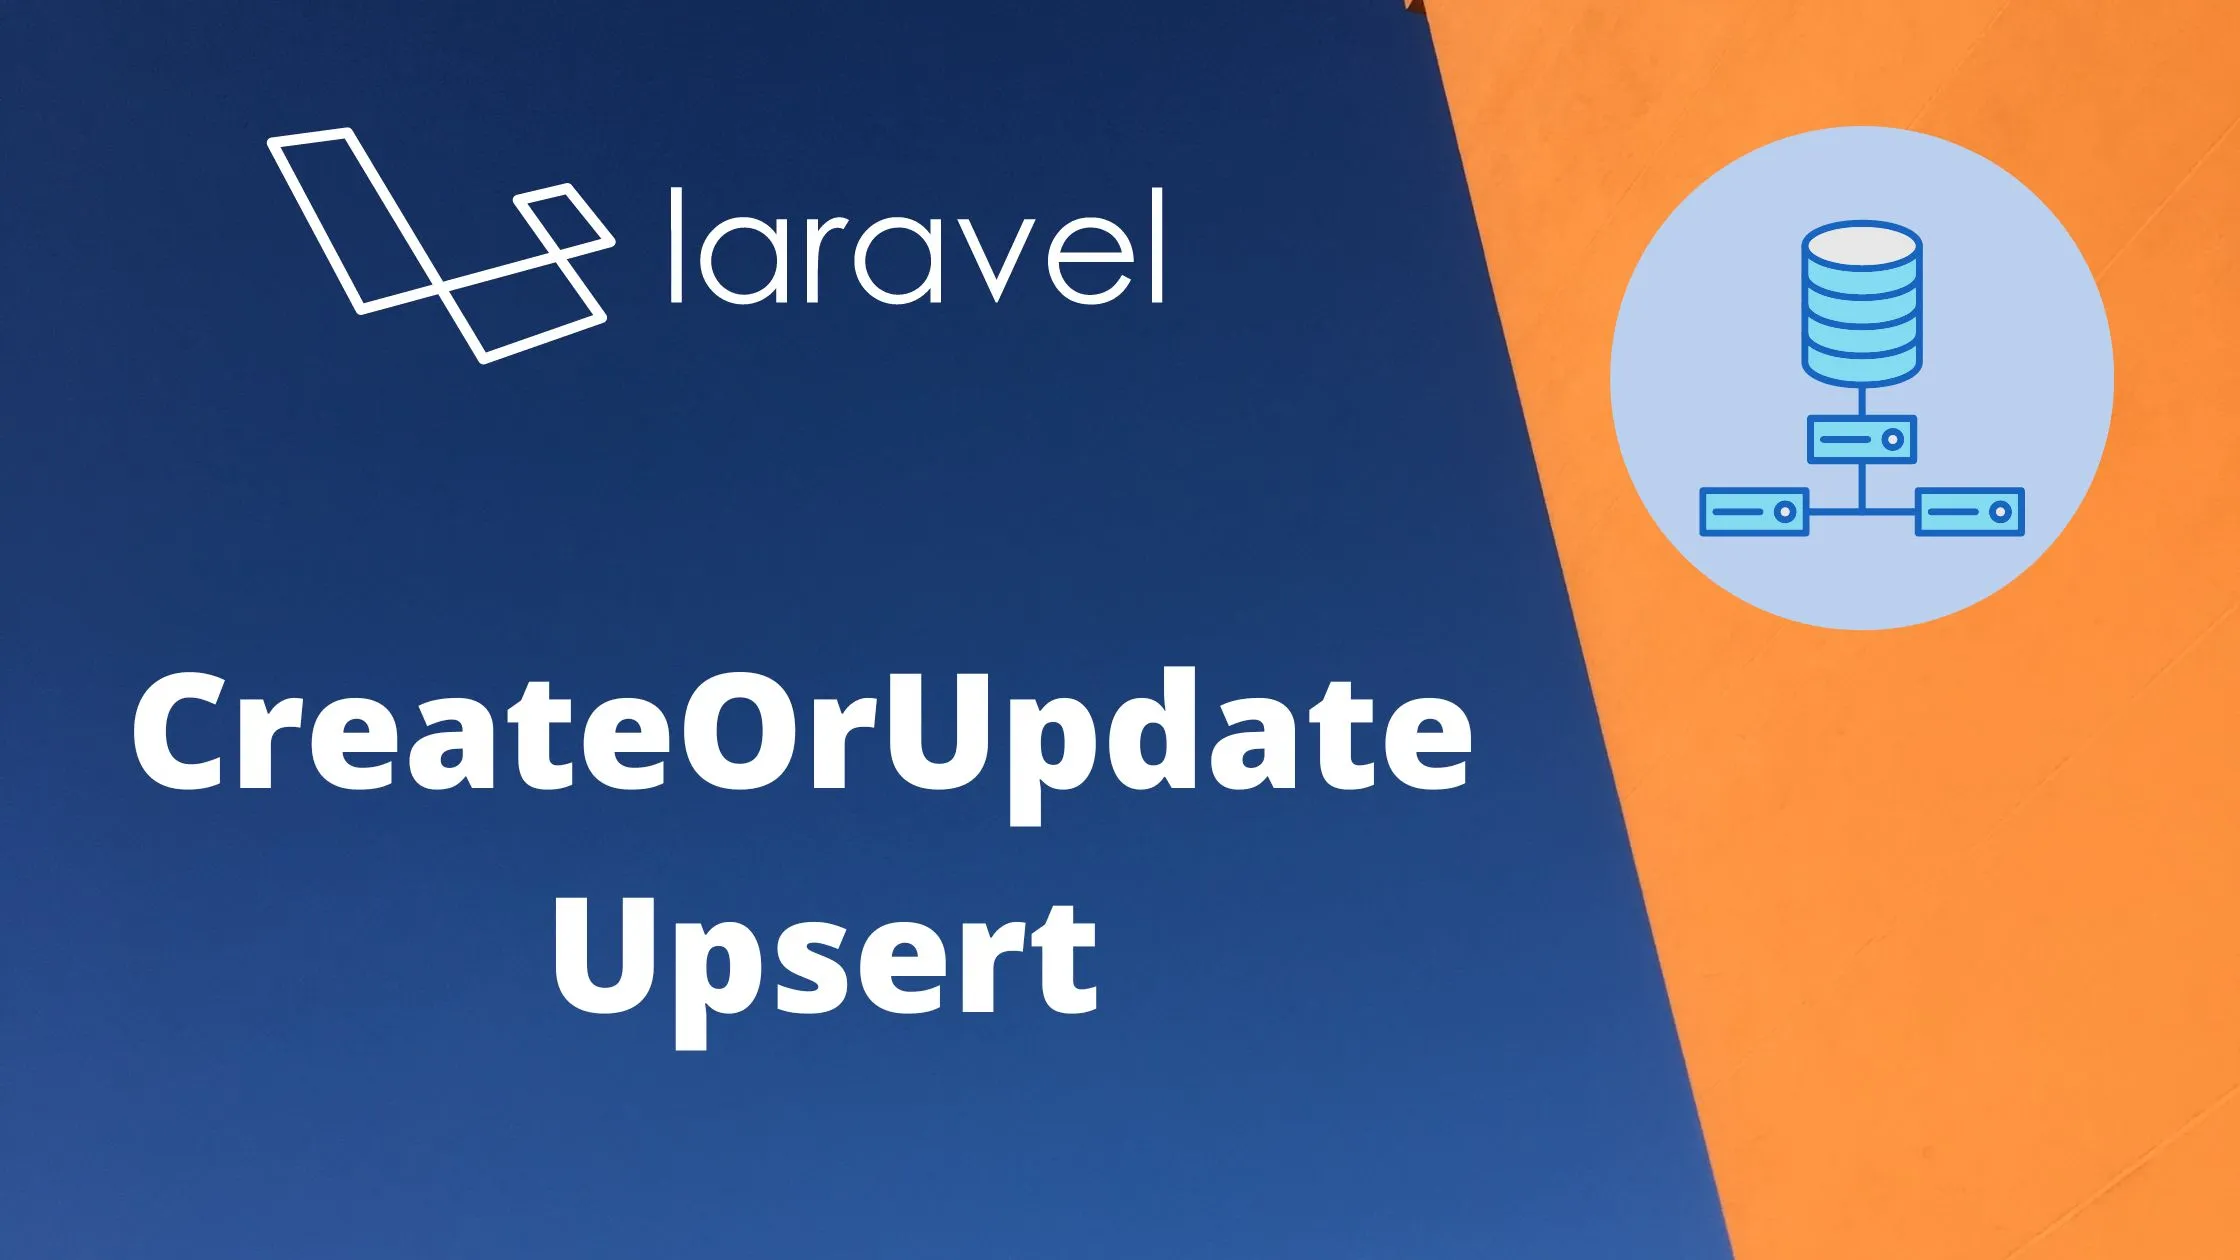 Laravel's CreateOrUpdate Upsert Technique: A Comprehensive Guide with Use Cases